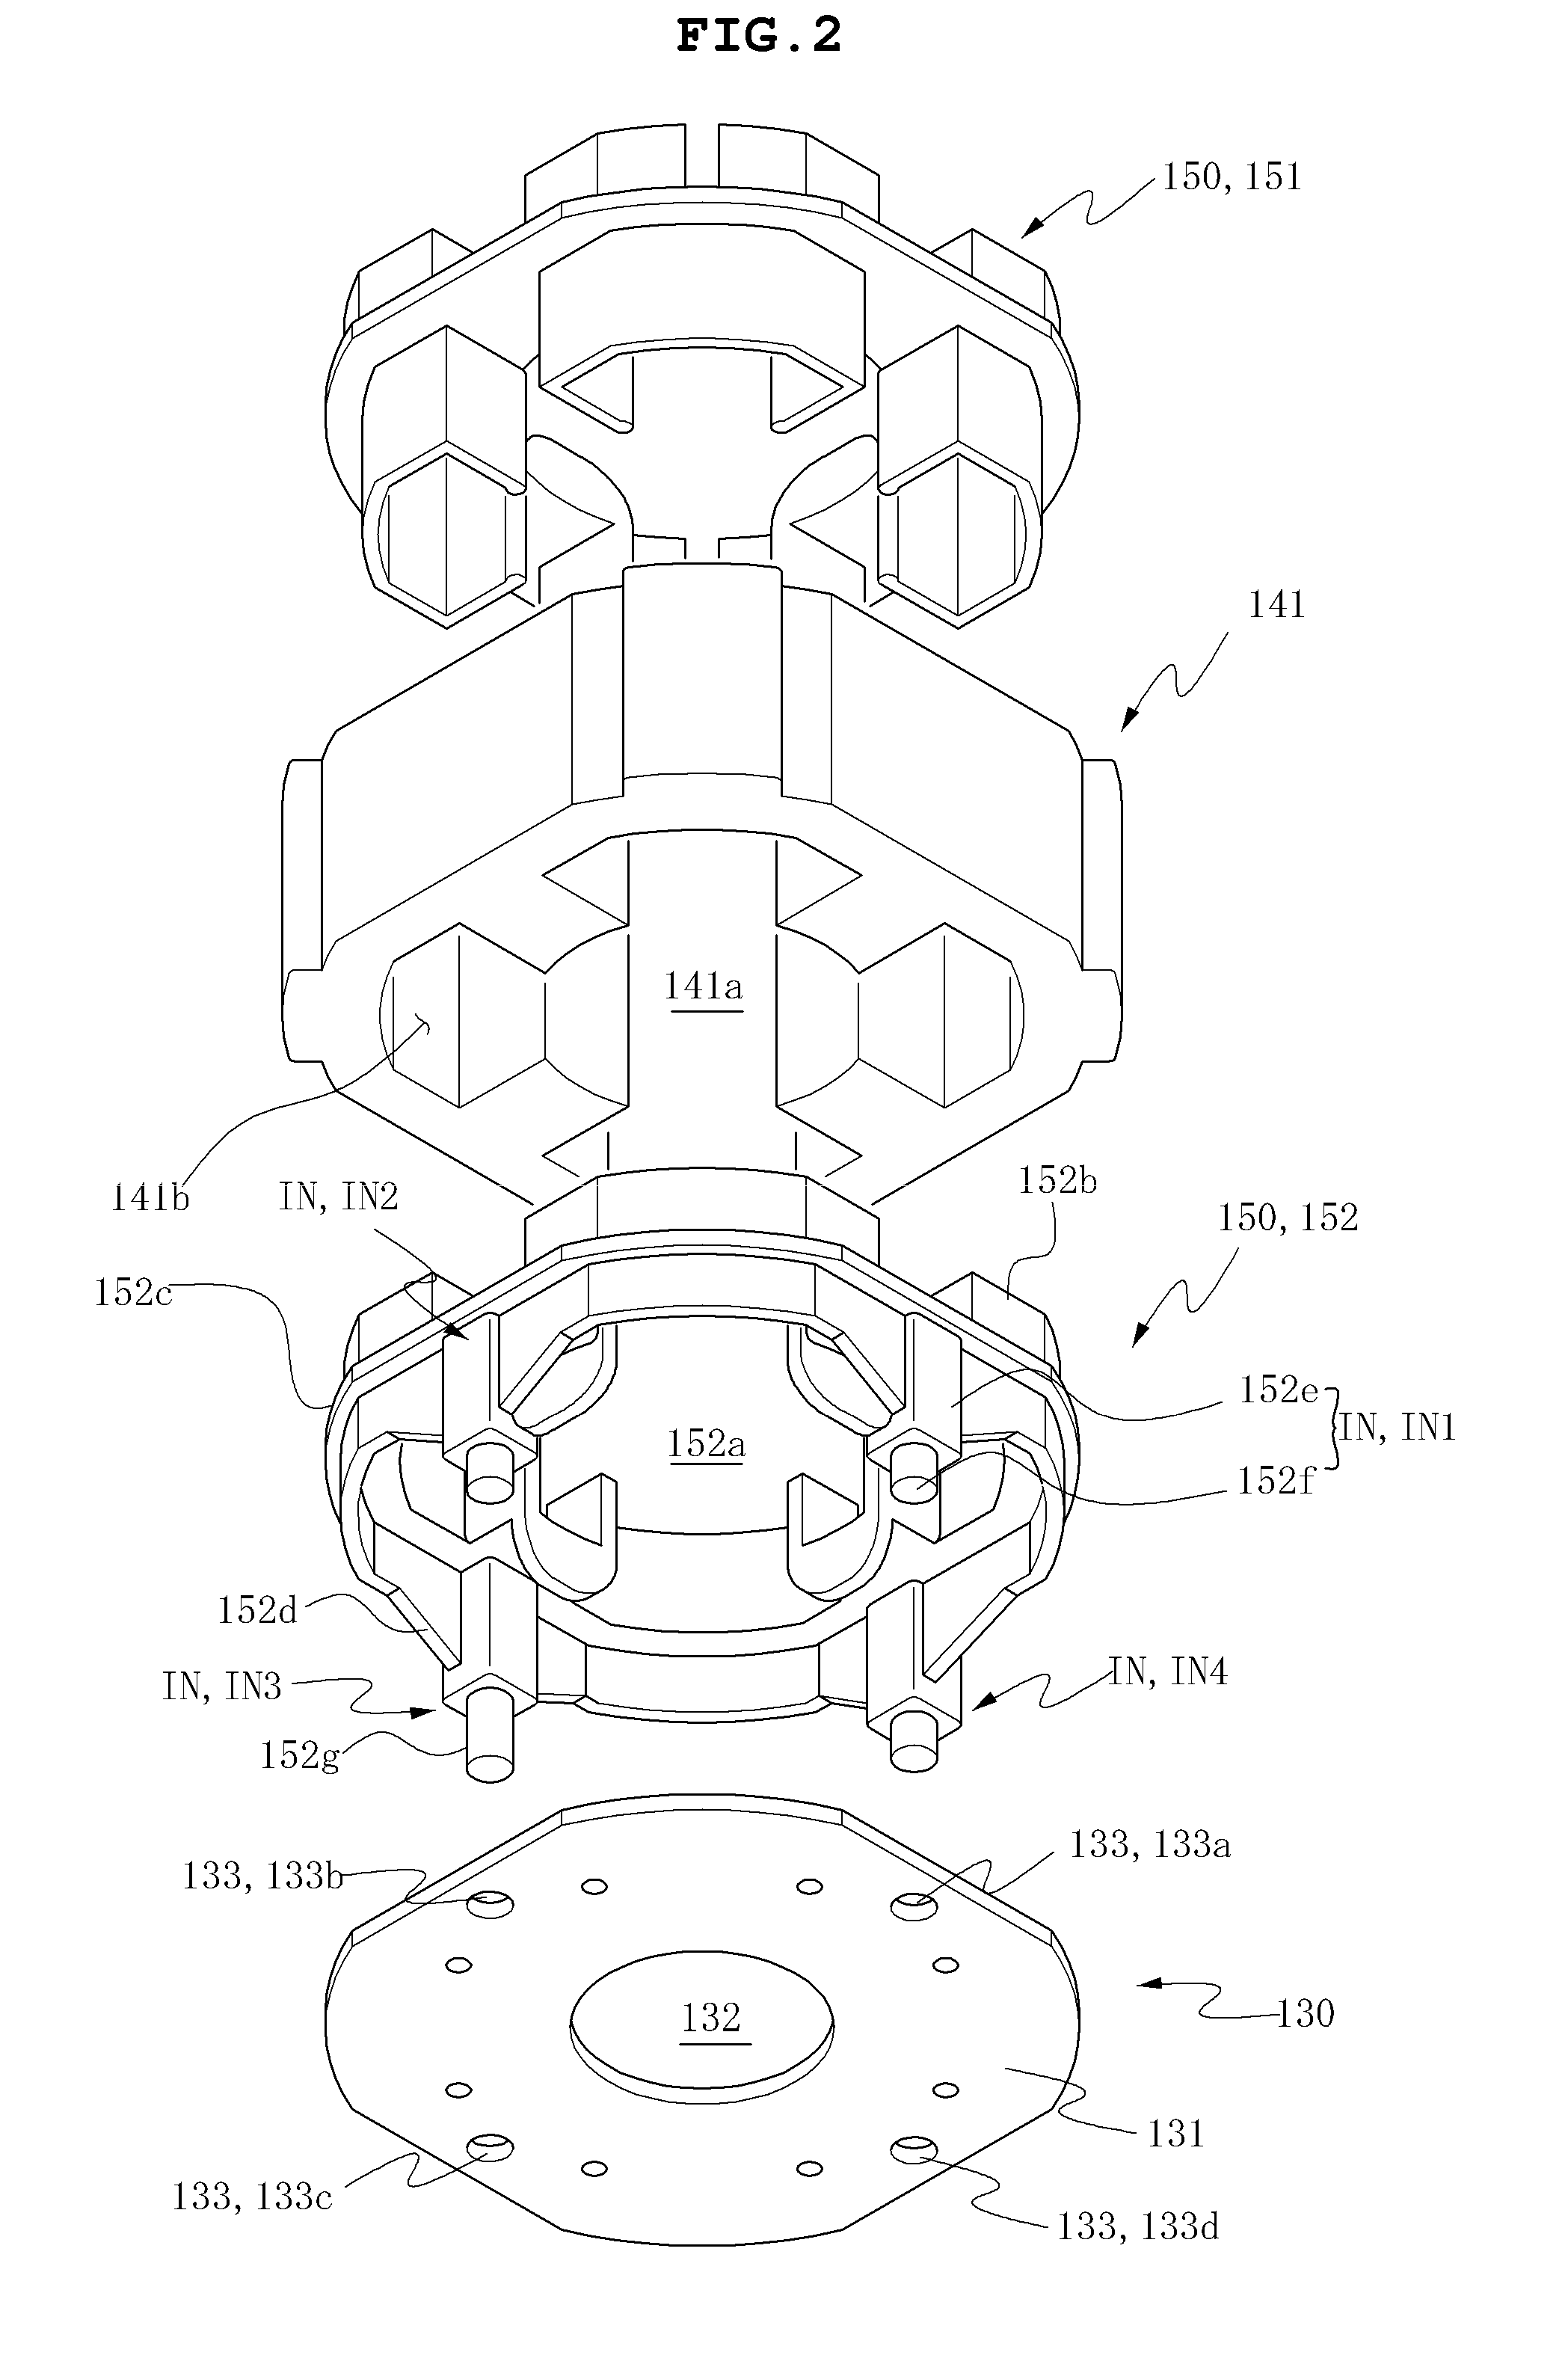 Switched reluctance motor assembly and method of assembling the same